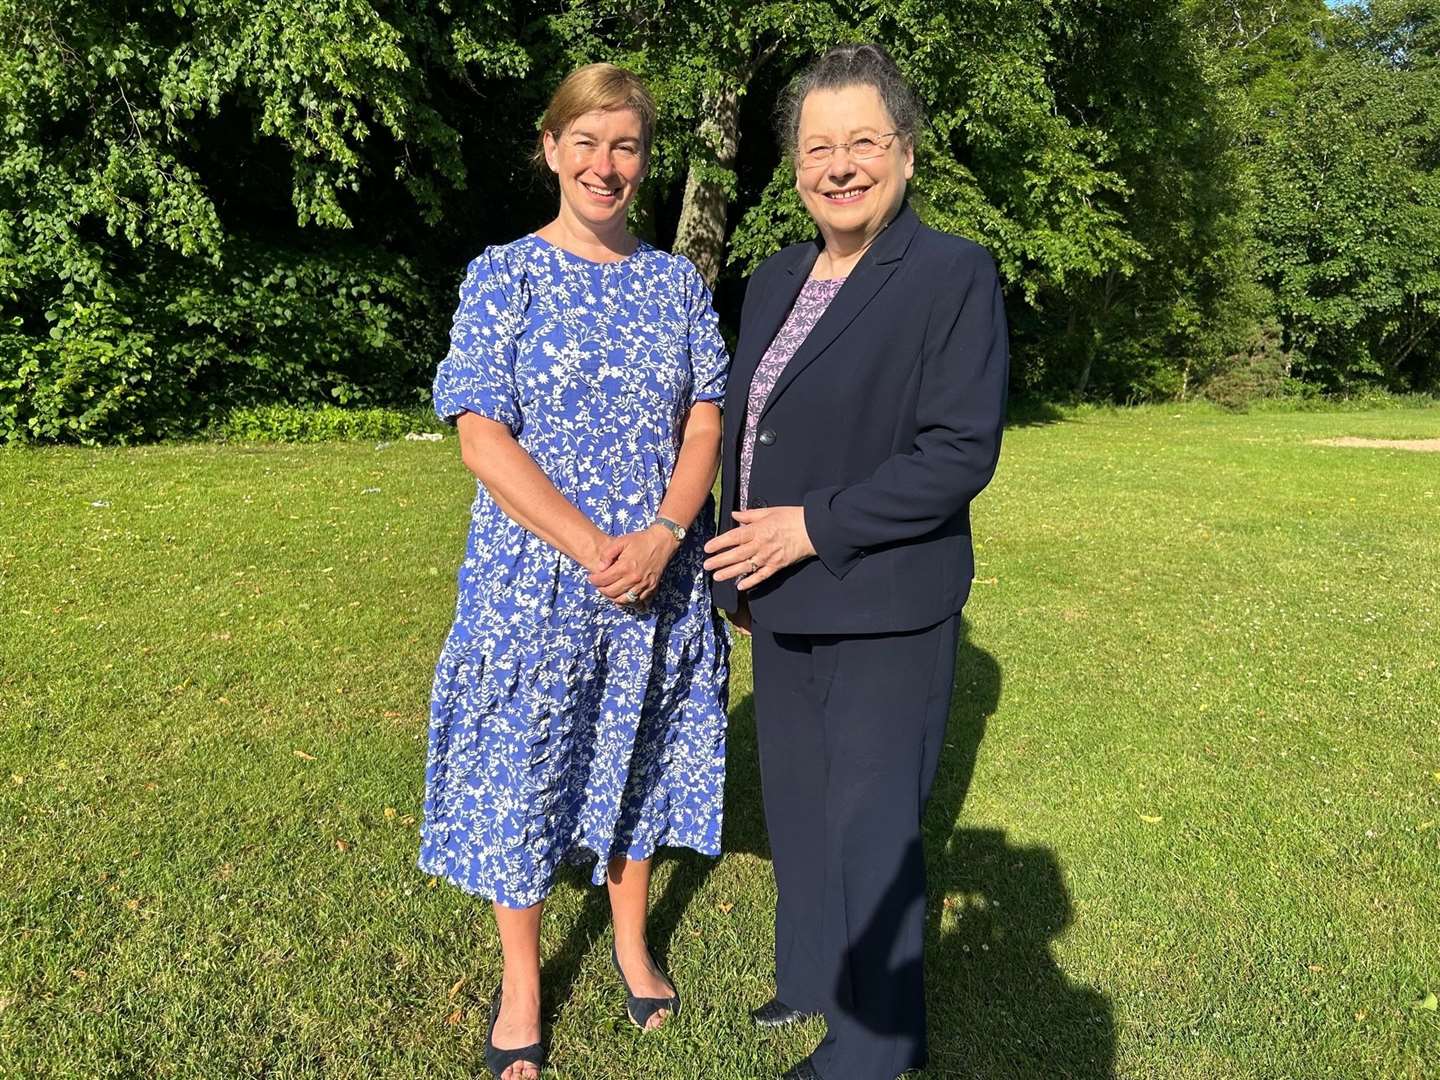 Ann Rossiter (right) started the business plan for the outdoor gym with the help of then-Forres Community Council chairwoman, current leader of Moray Council, Kathleen Robertson. The pair are pictured at the proposed site for the gym.